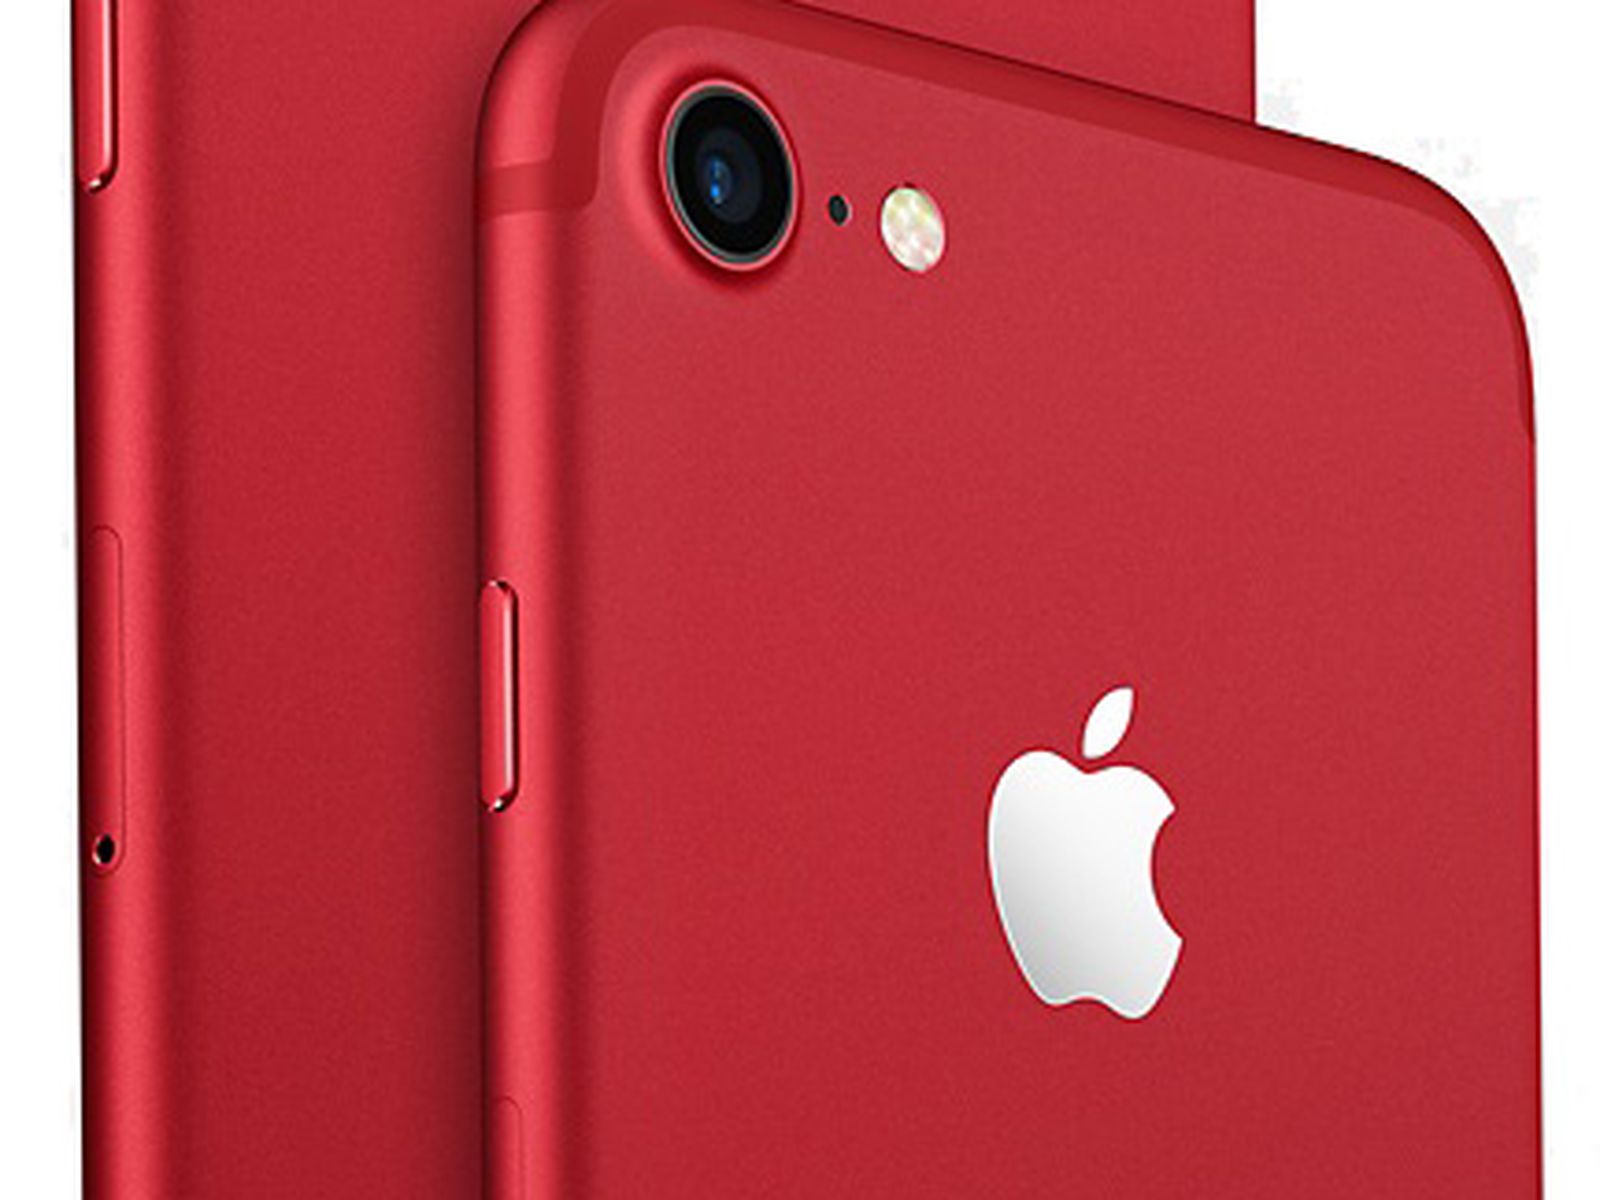 Quick Takes: (PRODUCT)RED iPhone 8, 8 Plus, or iPhone X? MacRumors